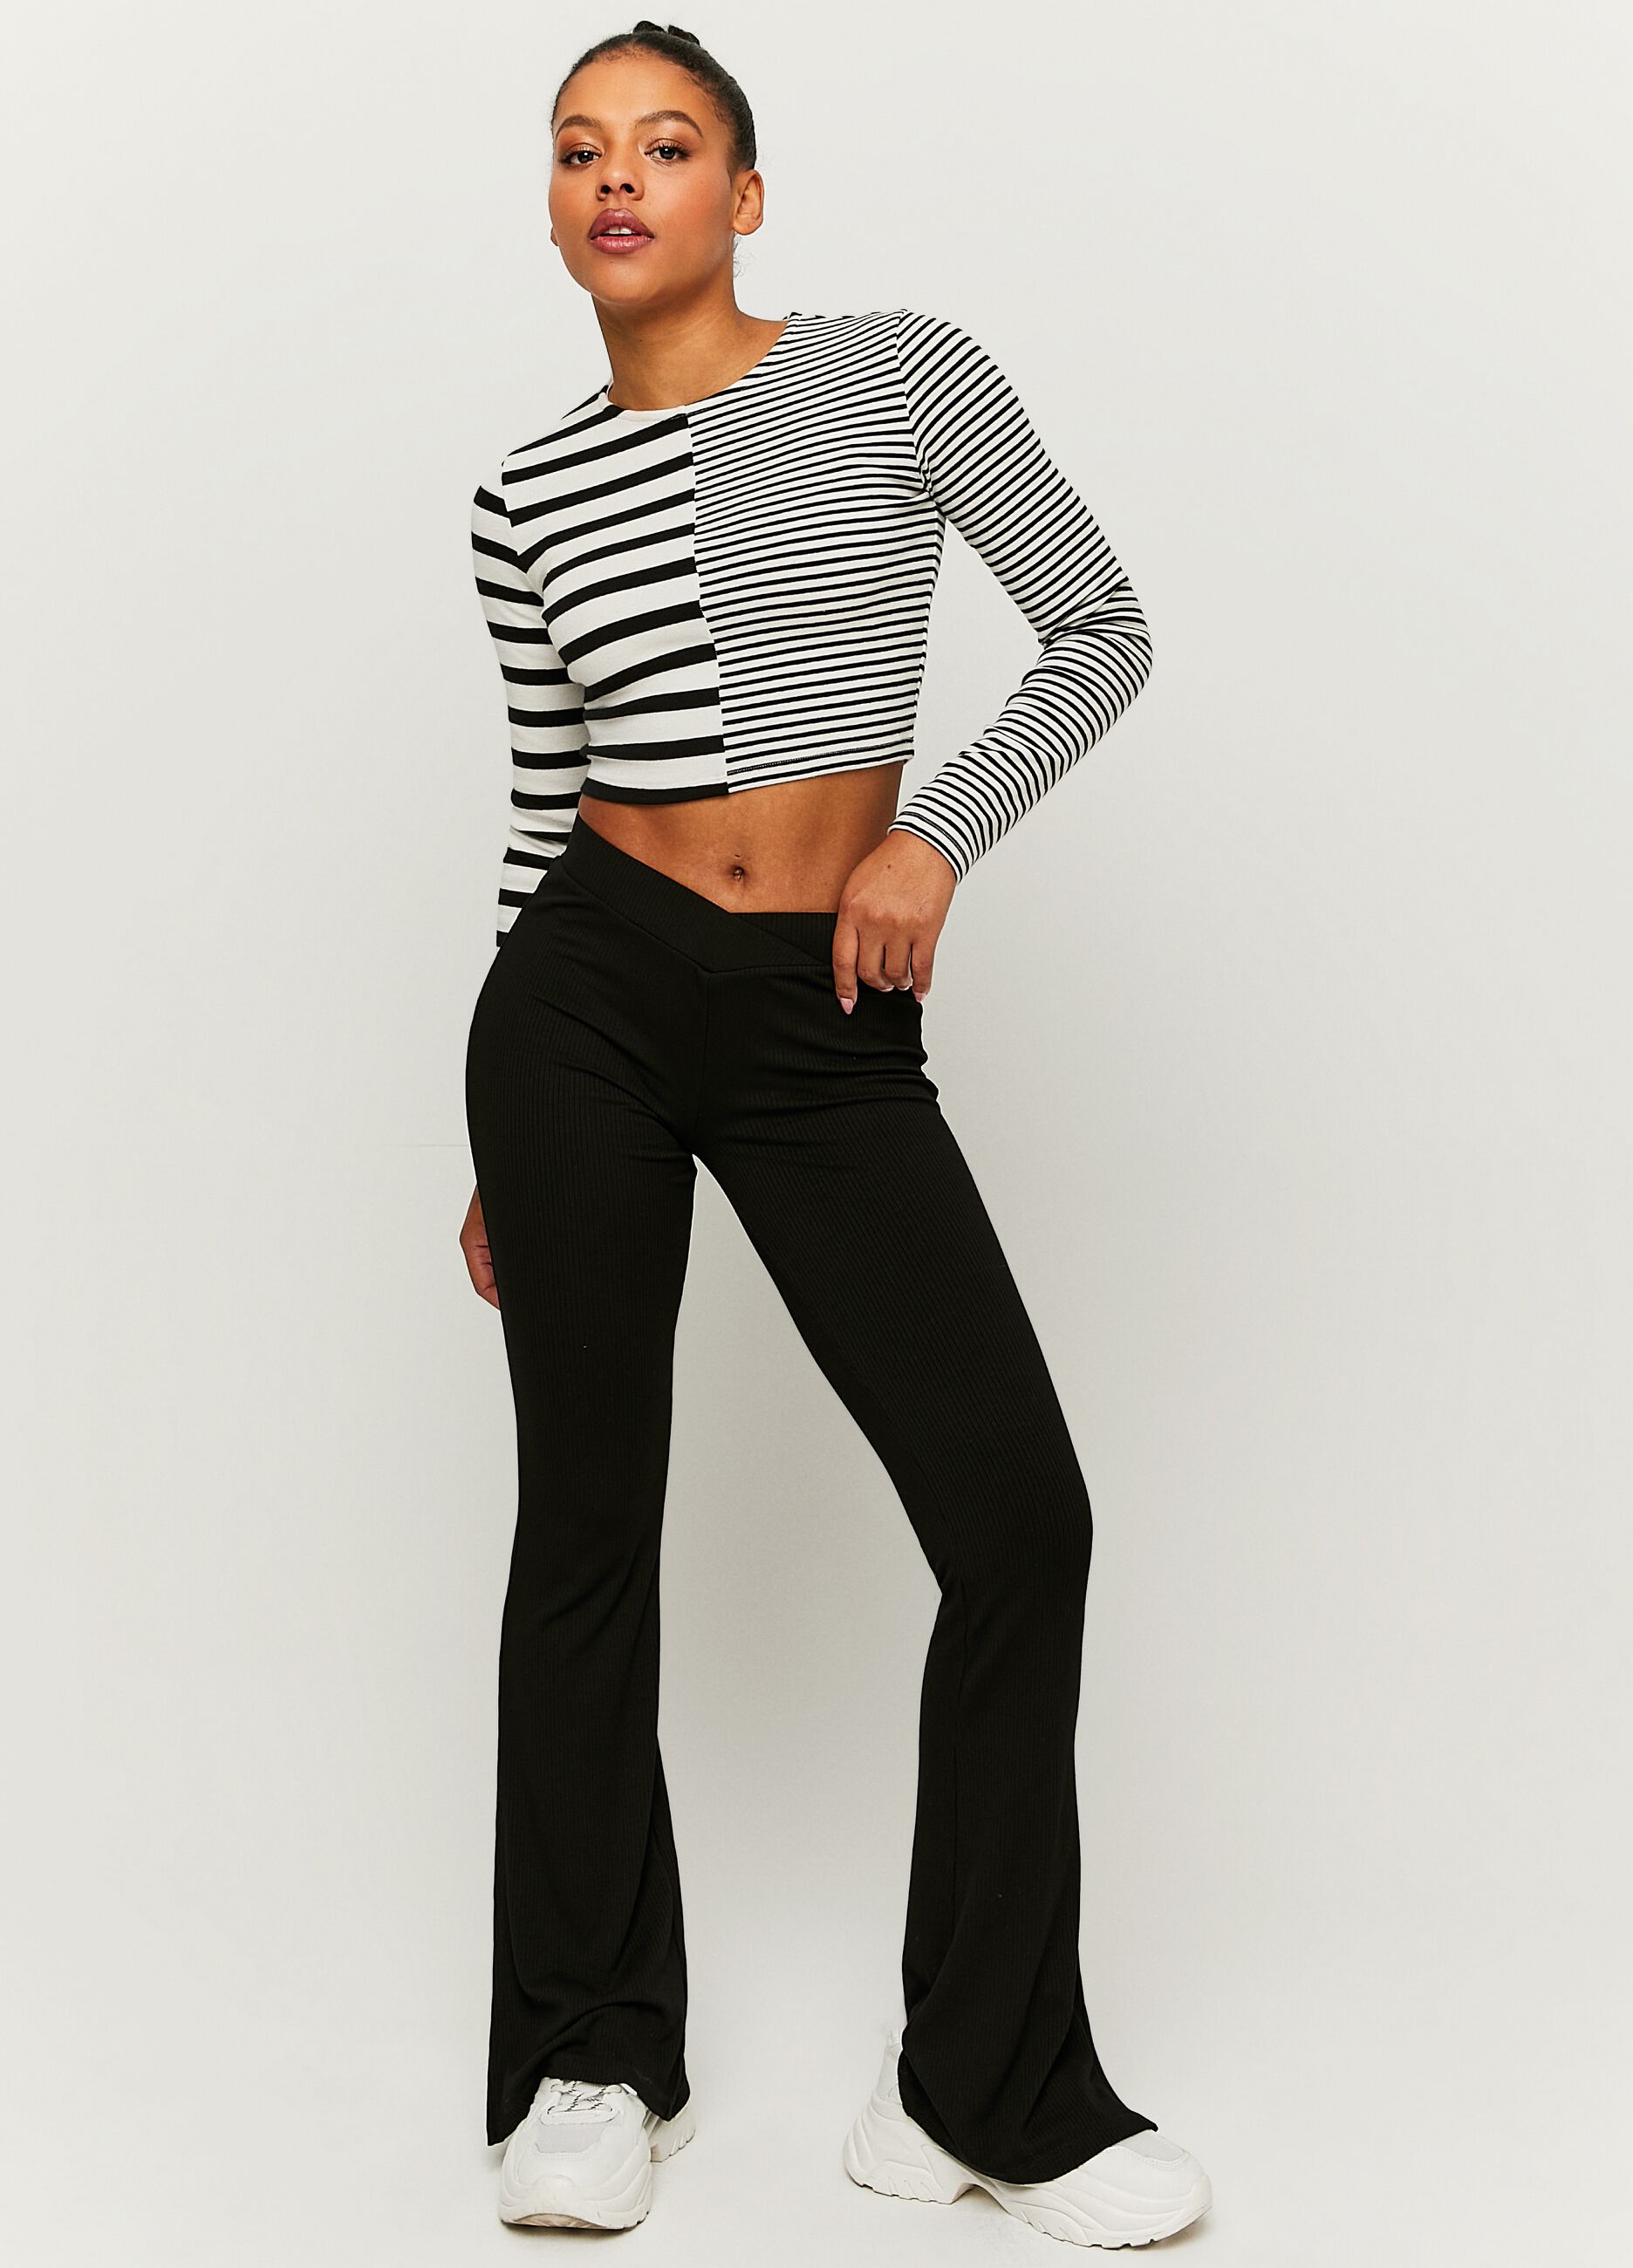 Flare-fit leggings with flat ribbing